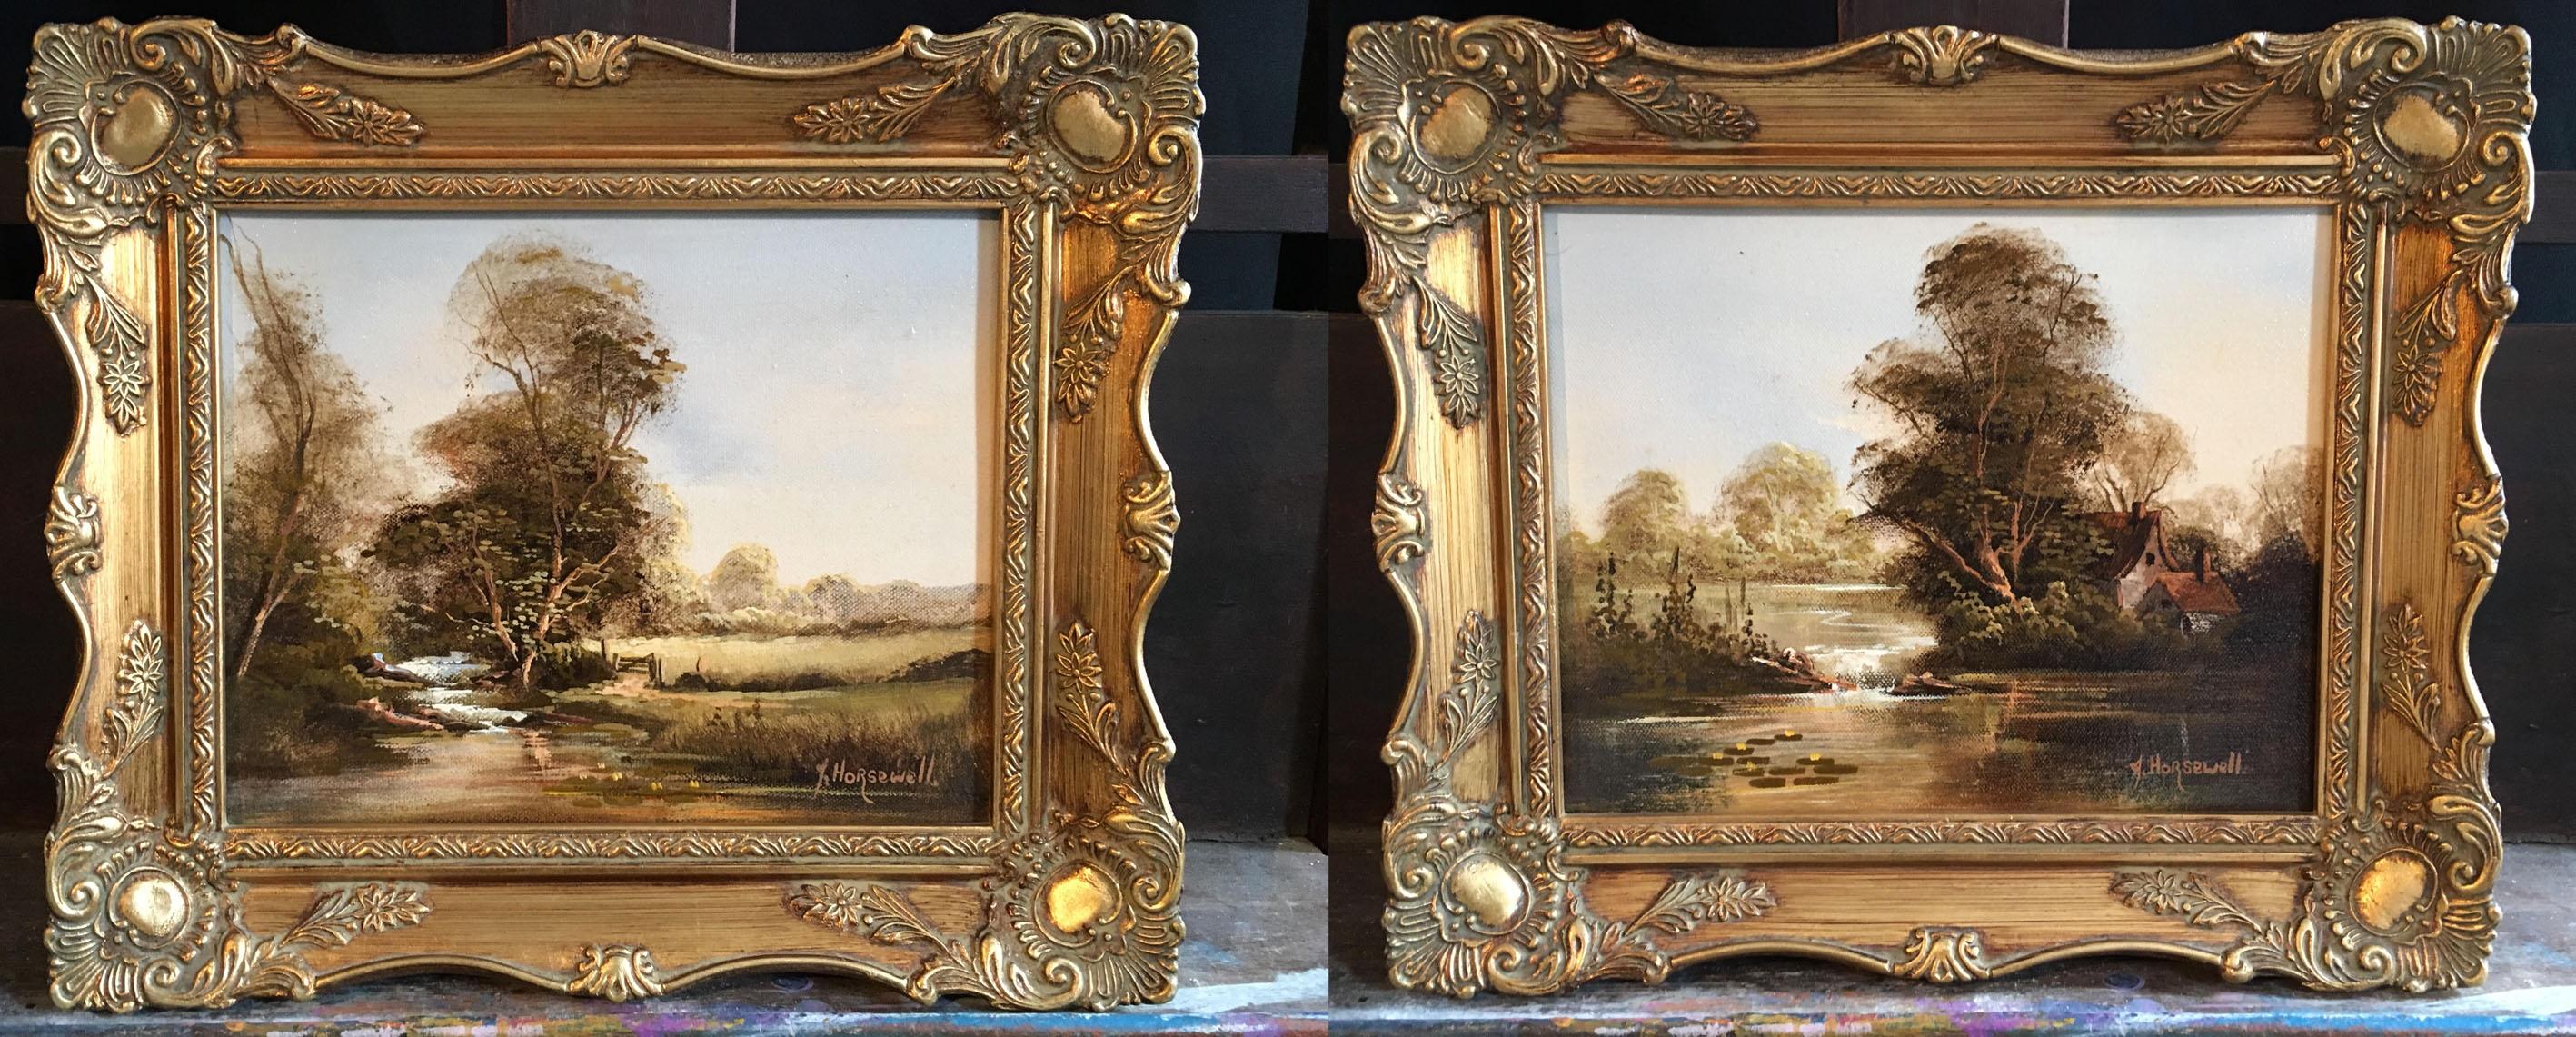 Brian D. Horswell Landscape Painting - Pair English Rural Landscape Oil Paintings, Signed by the Artist